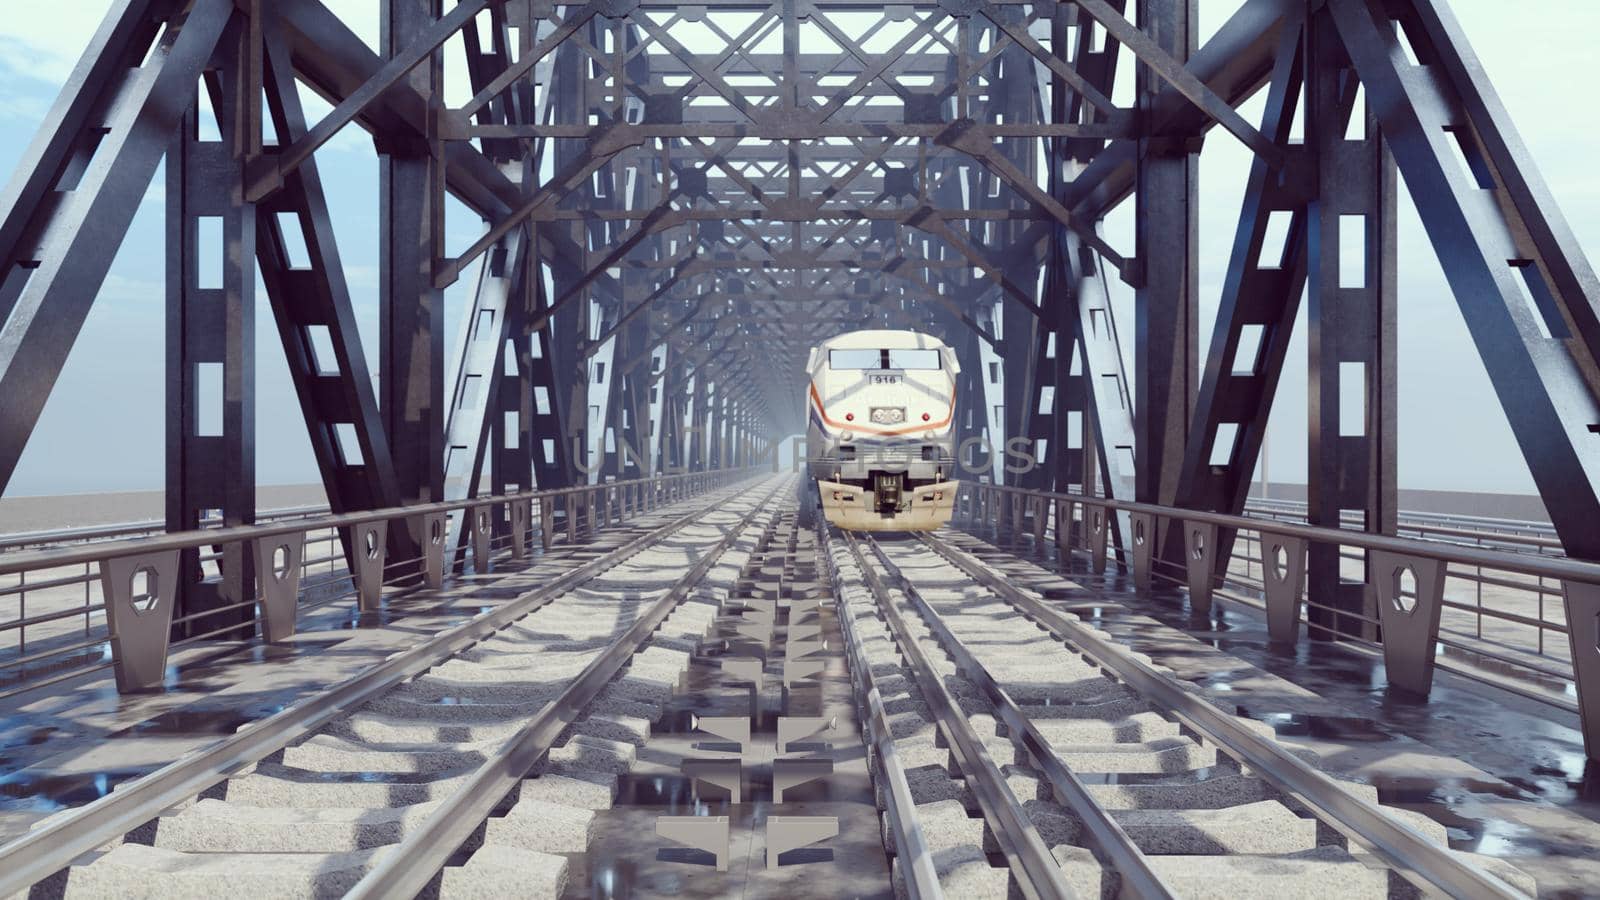 People cross a railway bridge on a cloudy summer morning when a passenger train passes by. 3D Rendering by designprojects